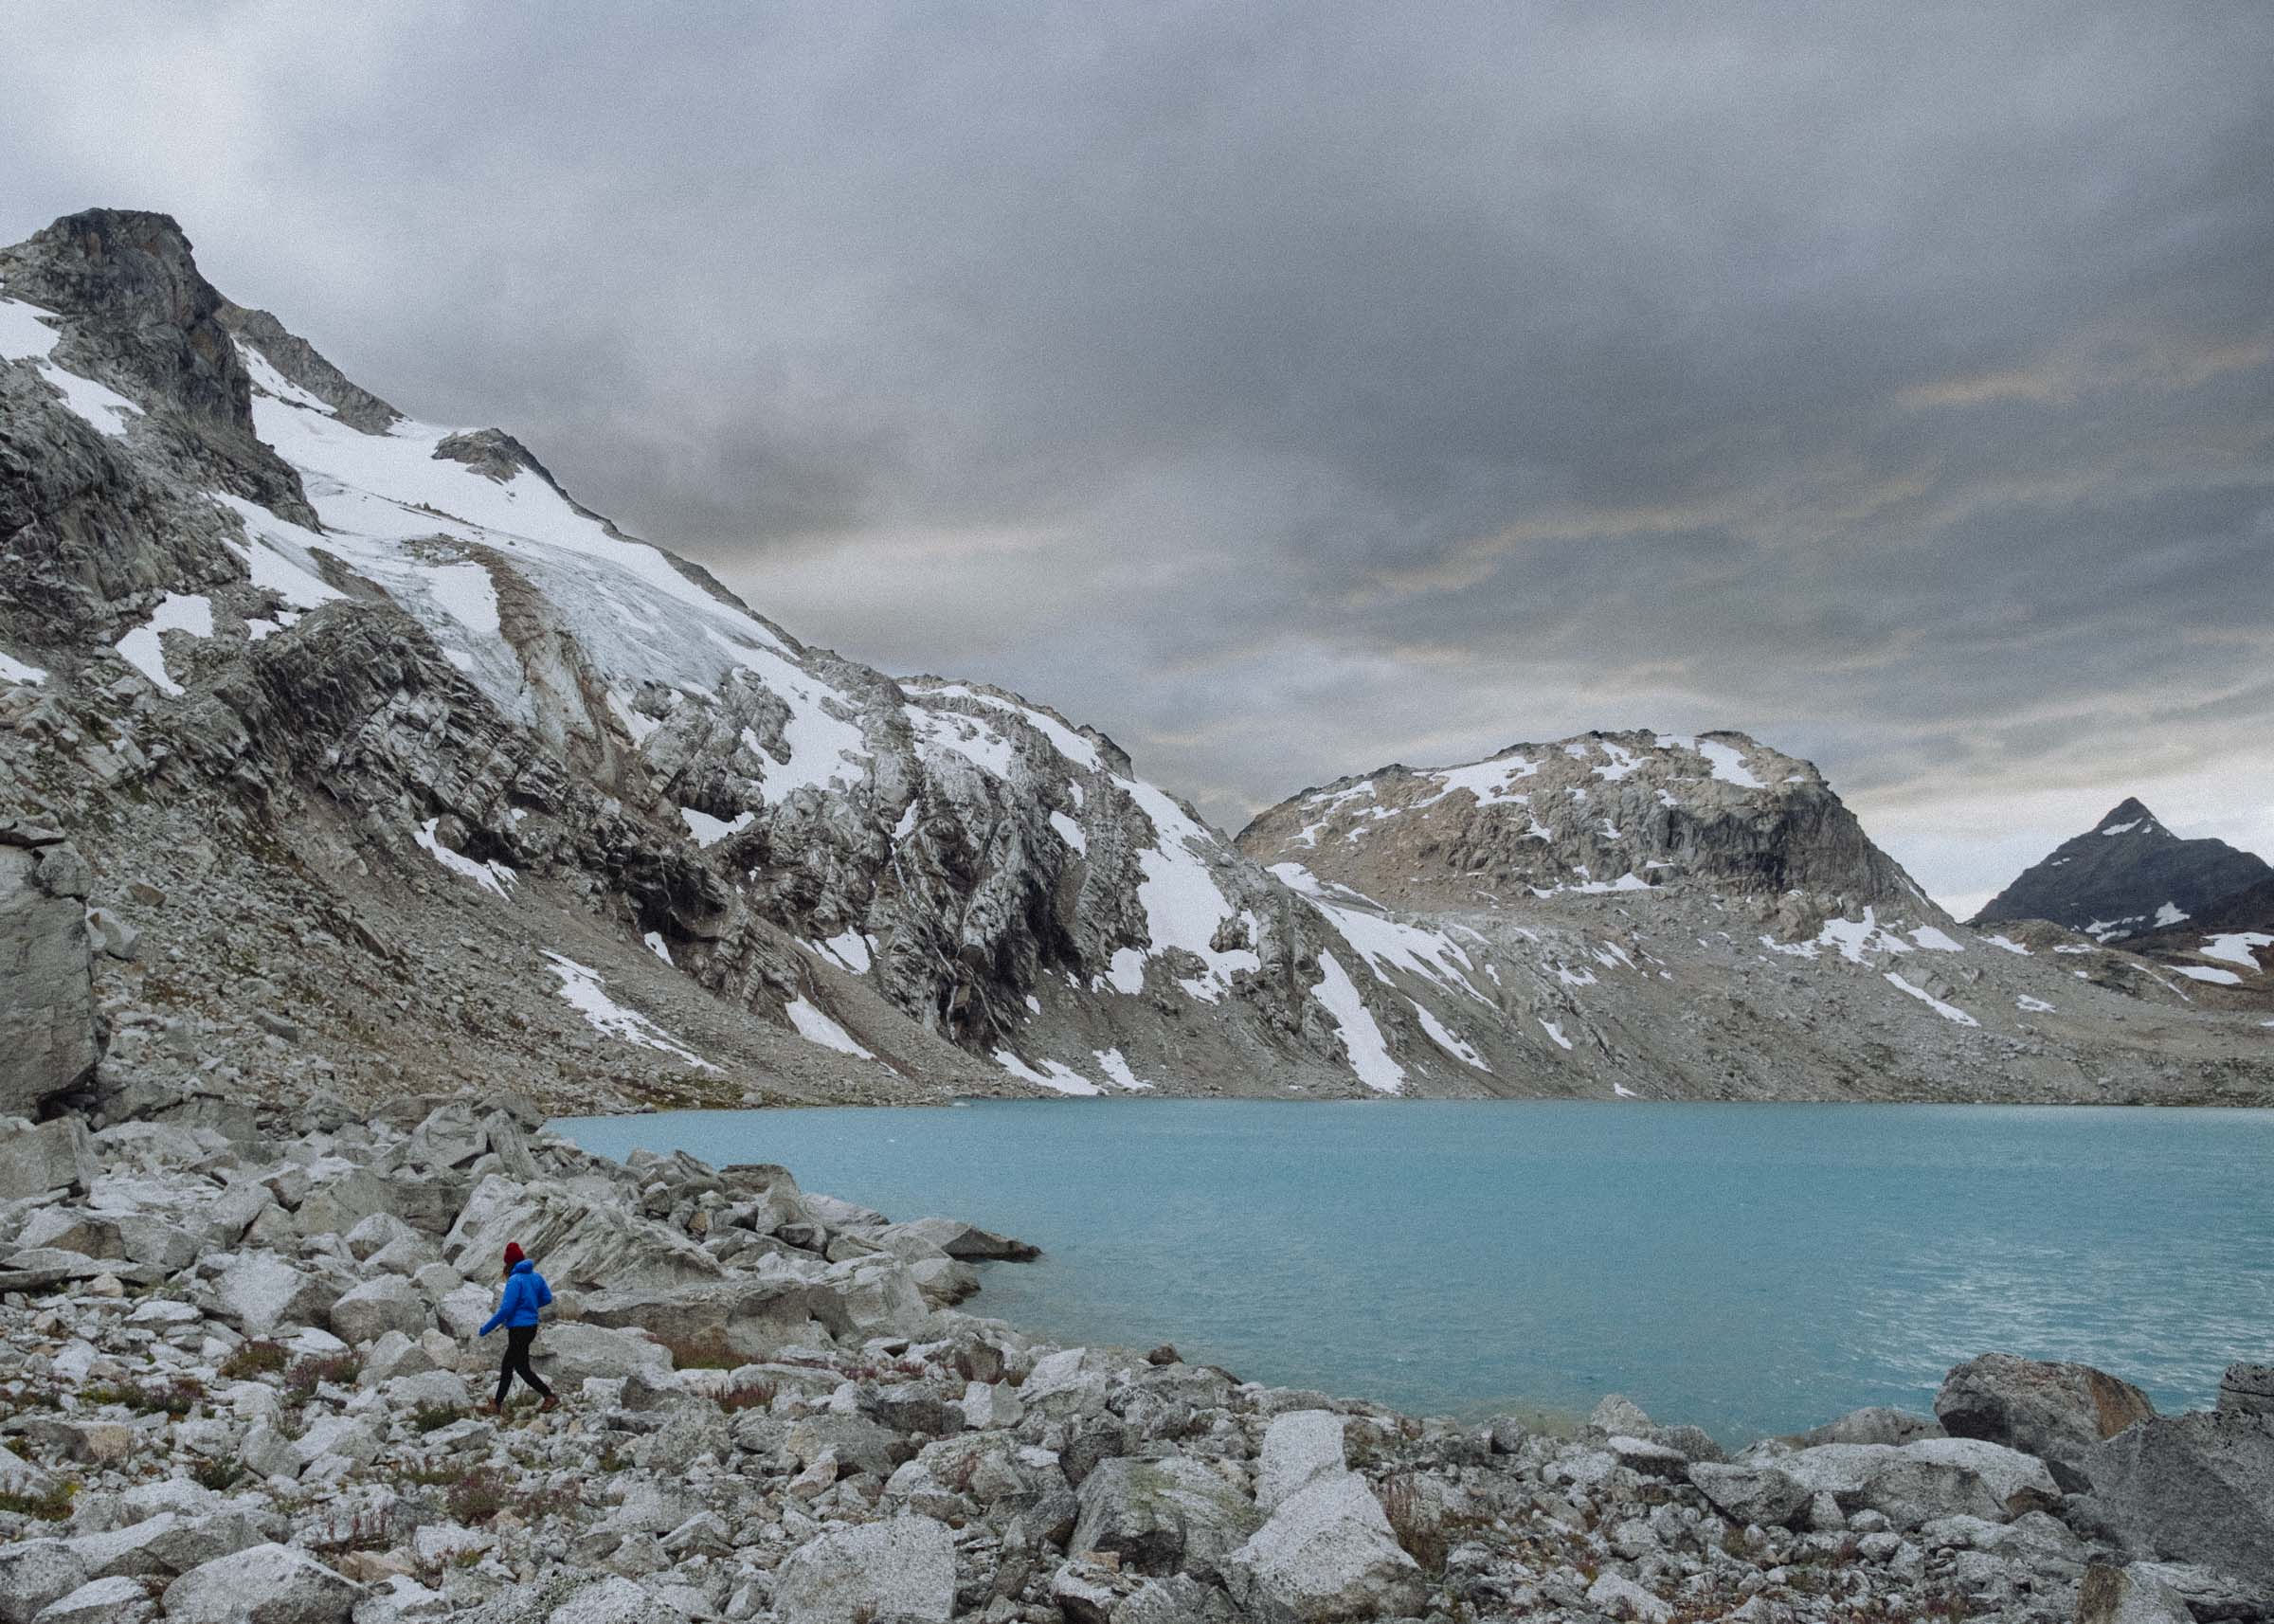 Hopping on rocks up at Thunderwater Lake in BC's Purcell Range